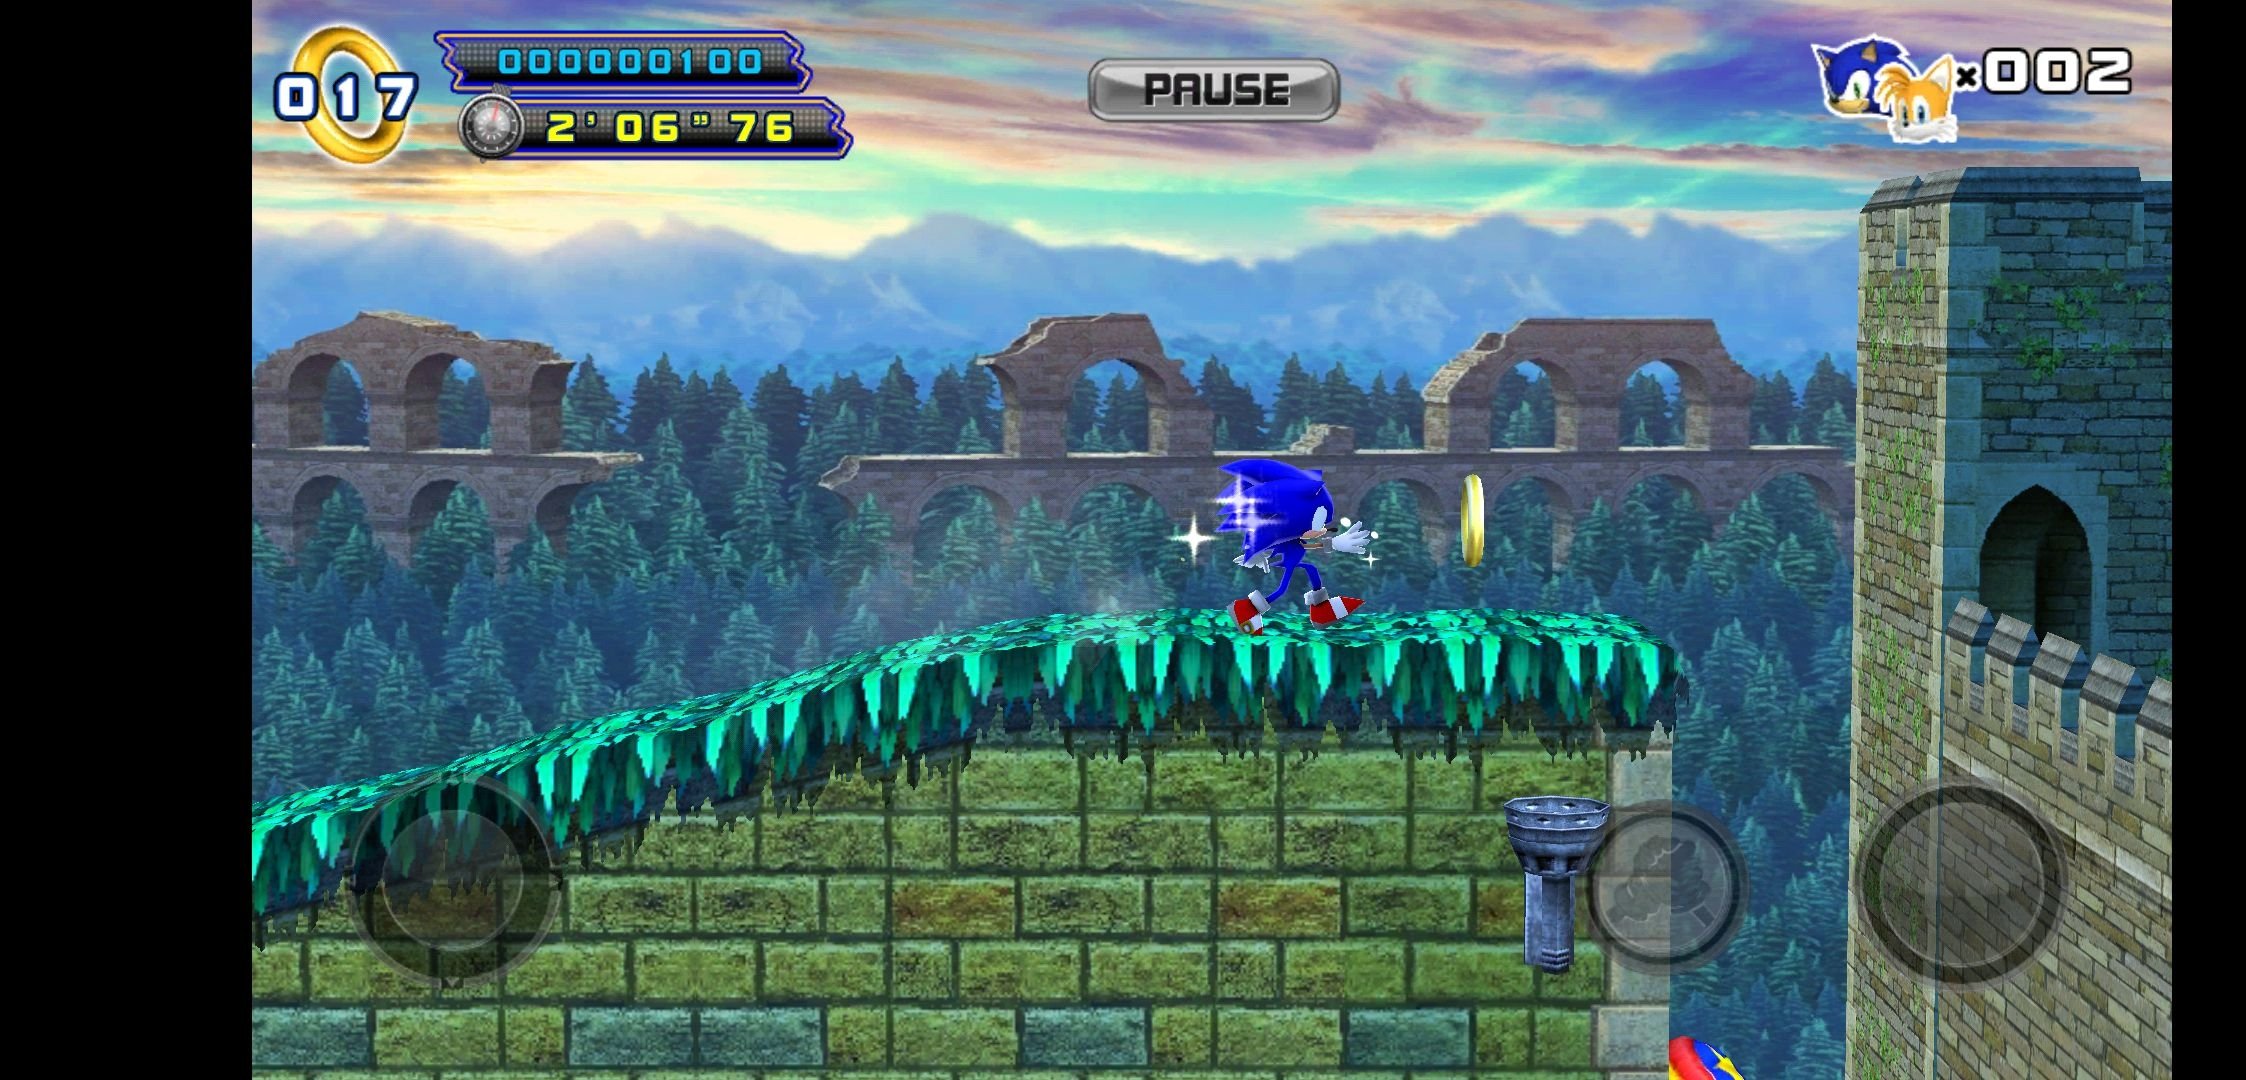 Sonic The Hedgehog 4 for Android - Download